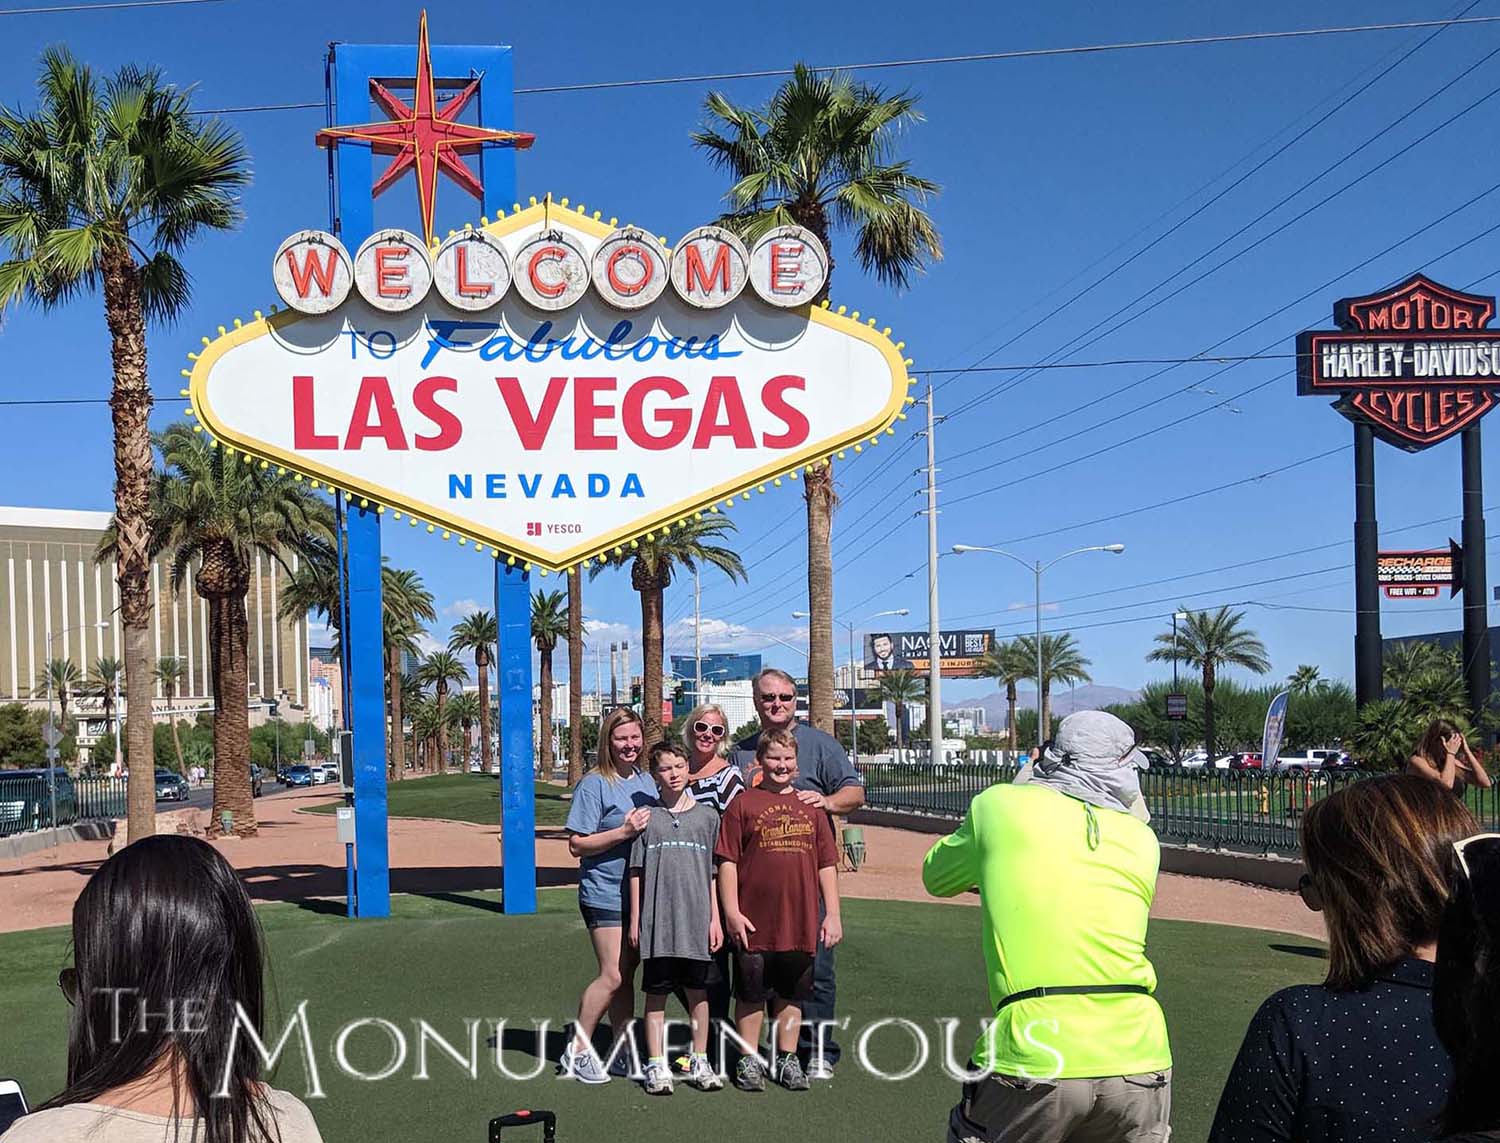 Welcome To Fabulous Las Vegas Sign - Monument